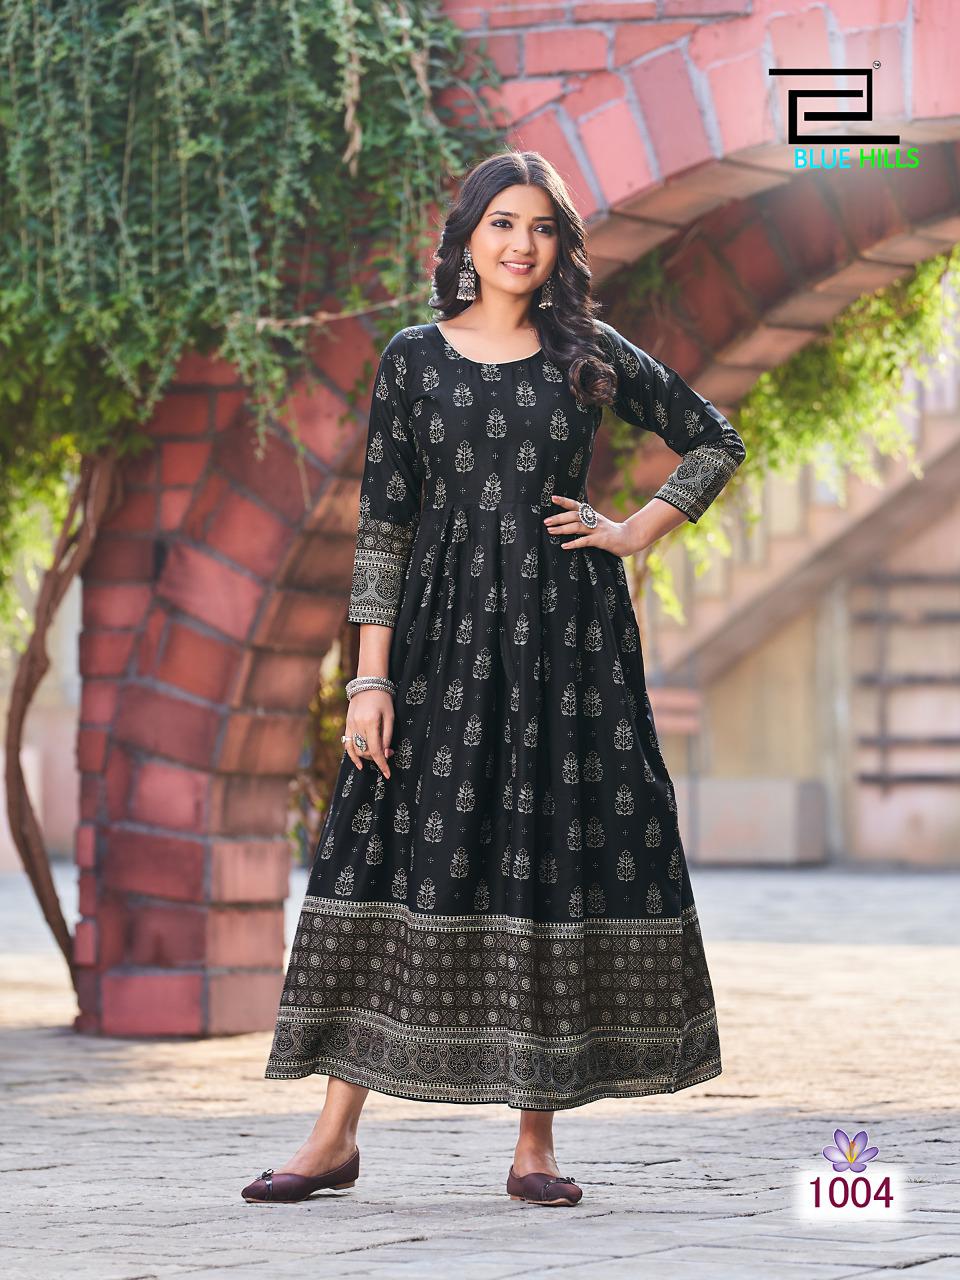 Reliance Trends  Official  Mark your calendar and get set to grab the  trendiest outfits at the Reliance Trends midseason sale Get 50 off on  27th 28th  29th May and